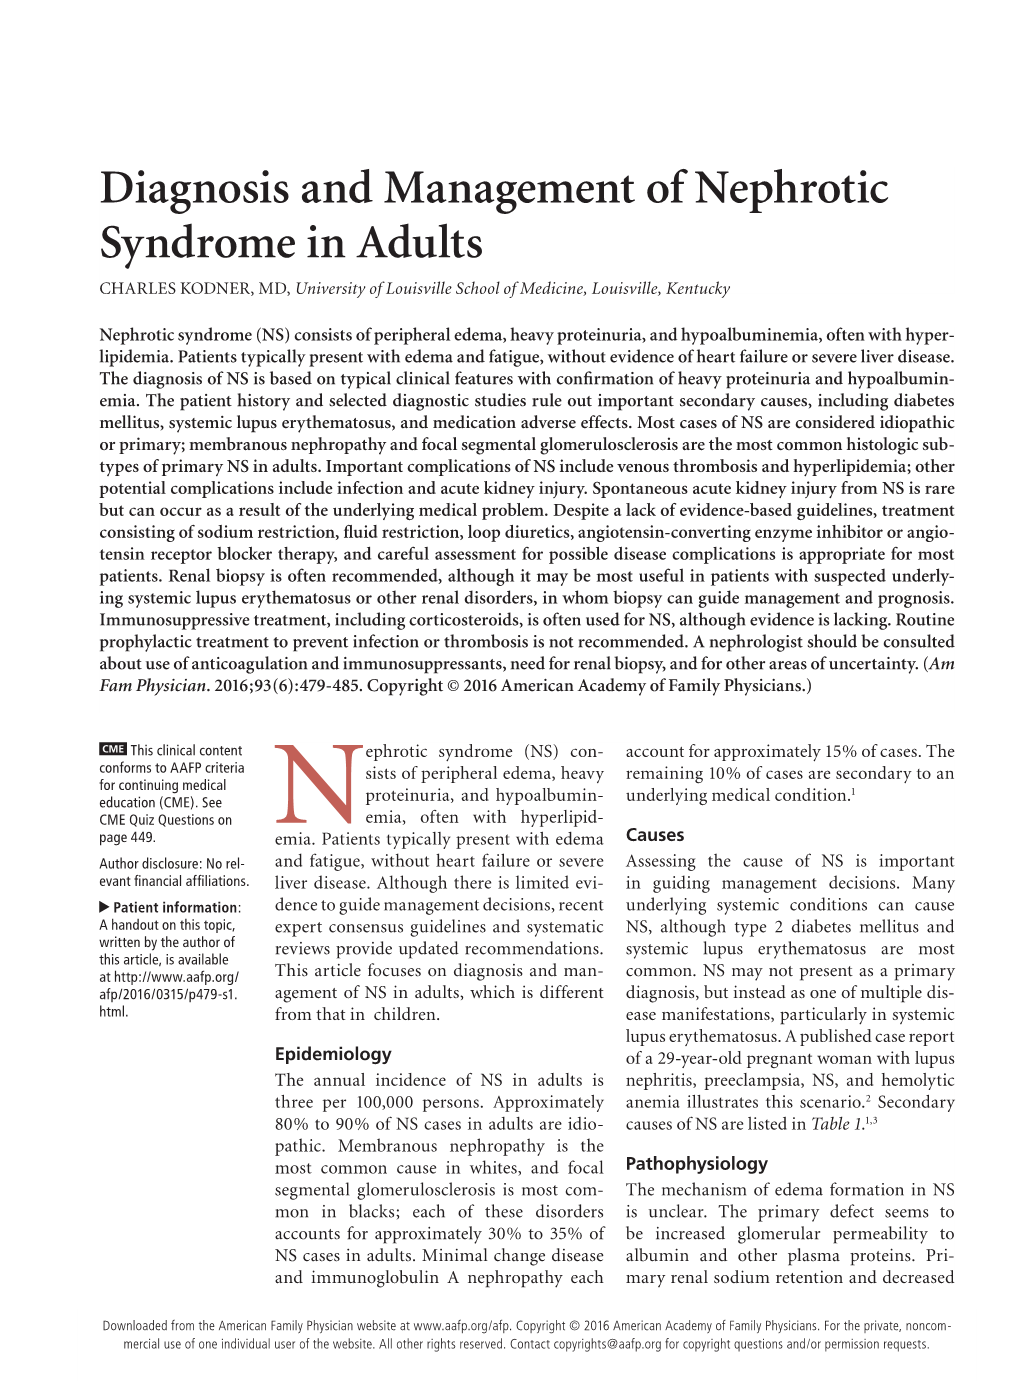 Diagnosis and Manage&lt;FEFF&gt;Ment of Nephrotic Syndrome in Adults